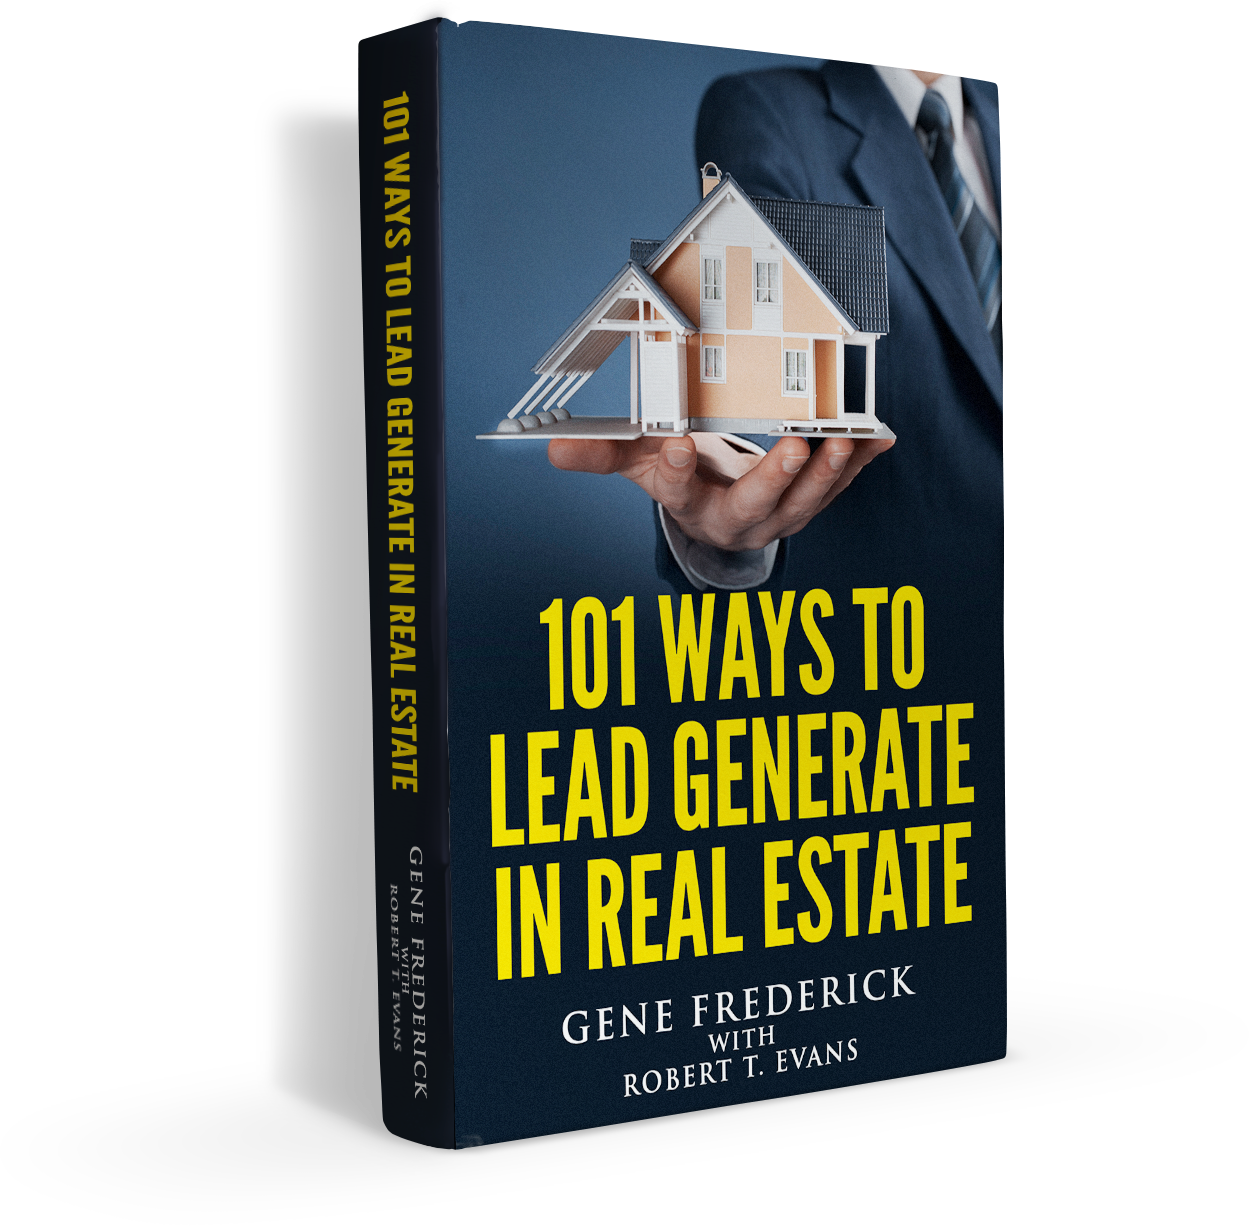 101 Ways to Lead Generate in Real Estate